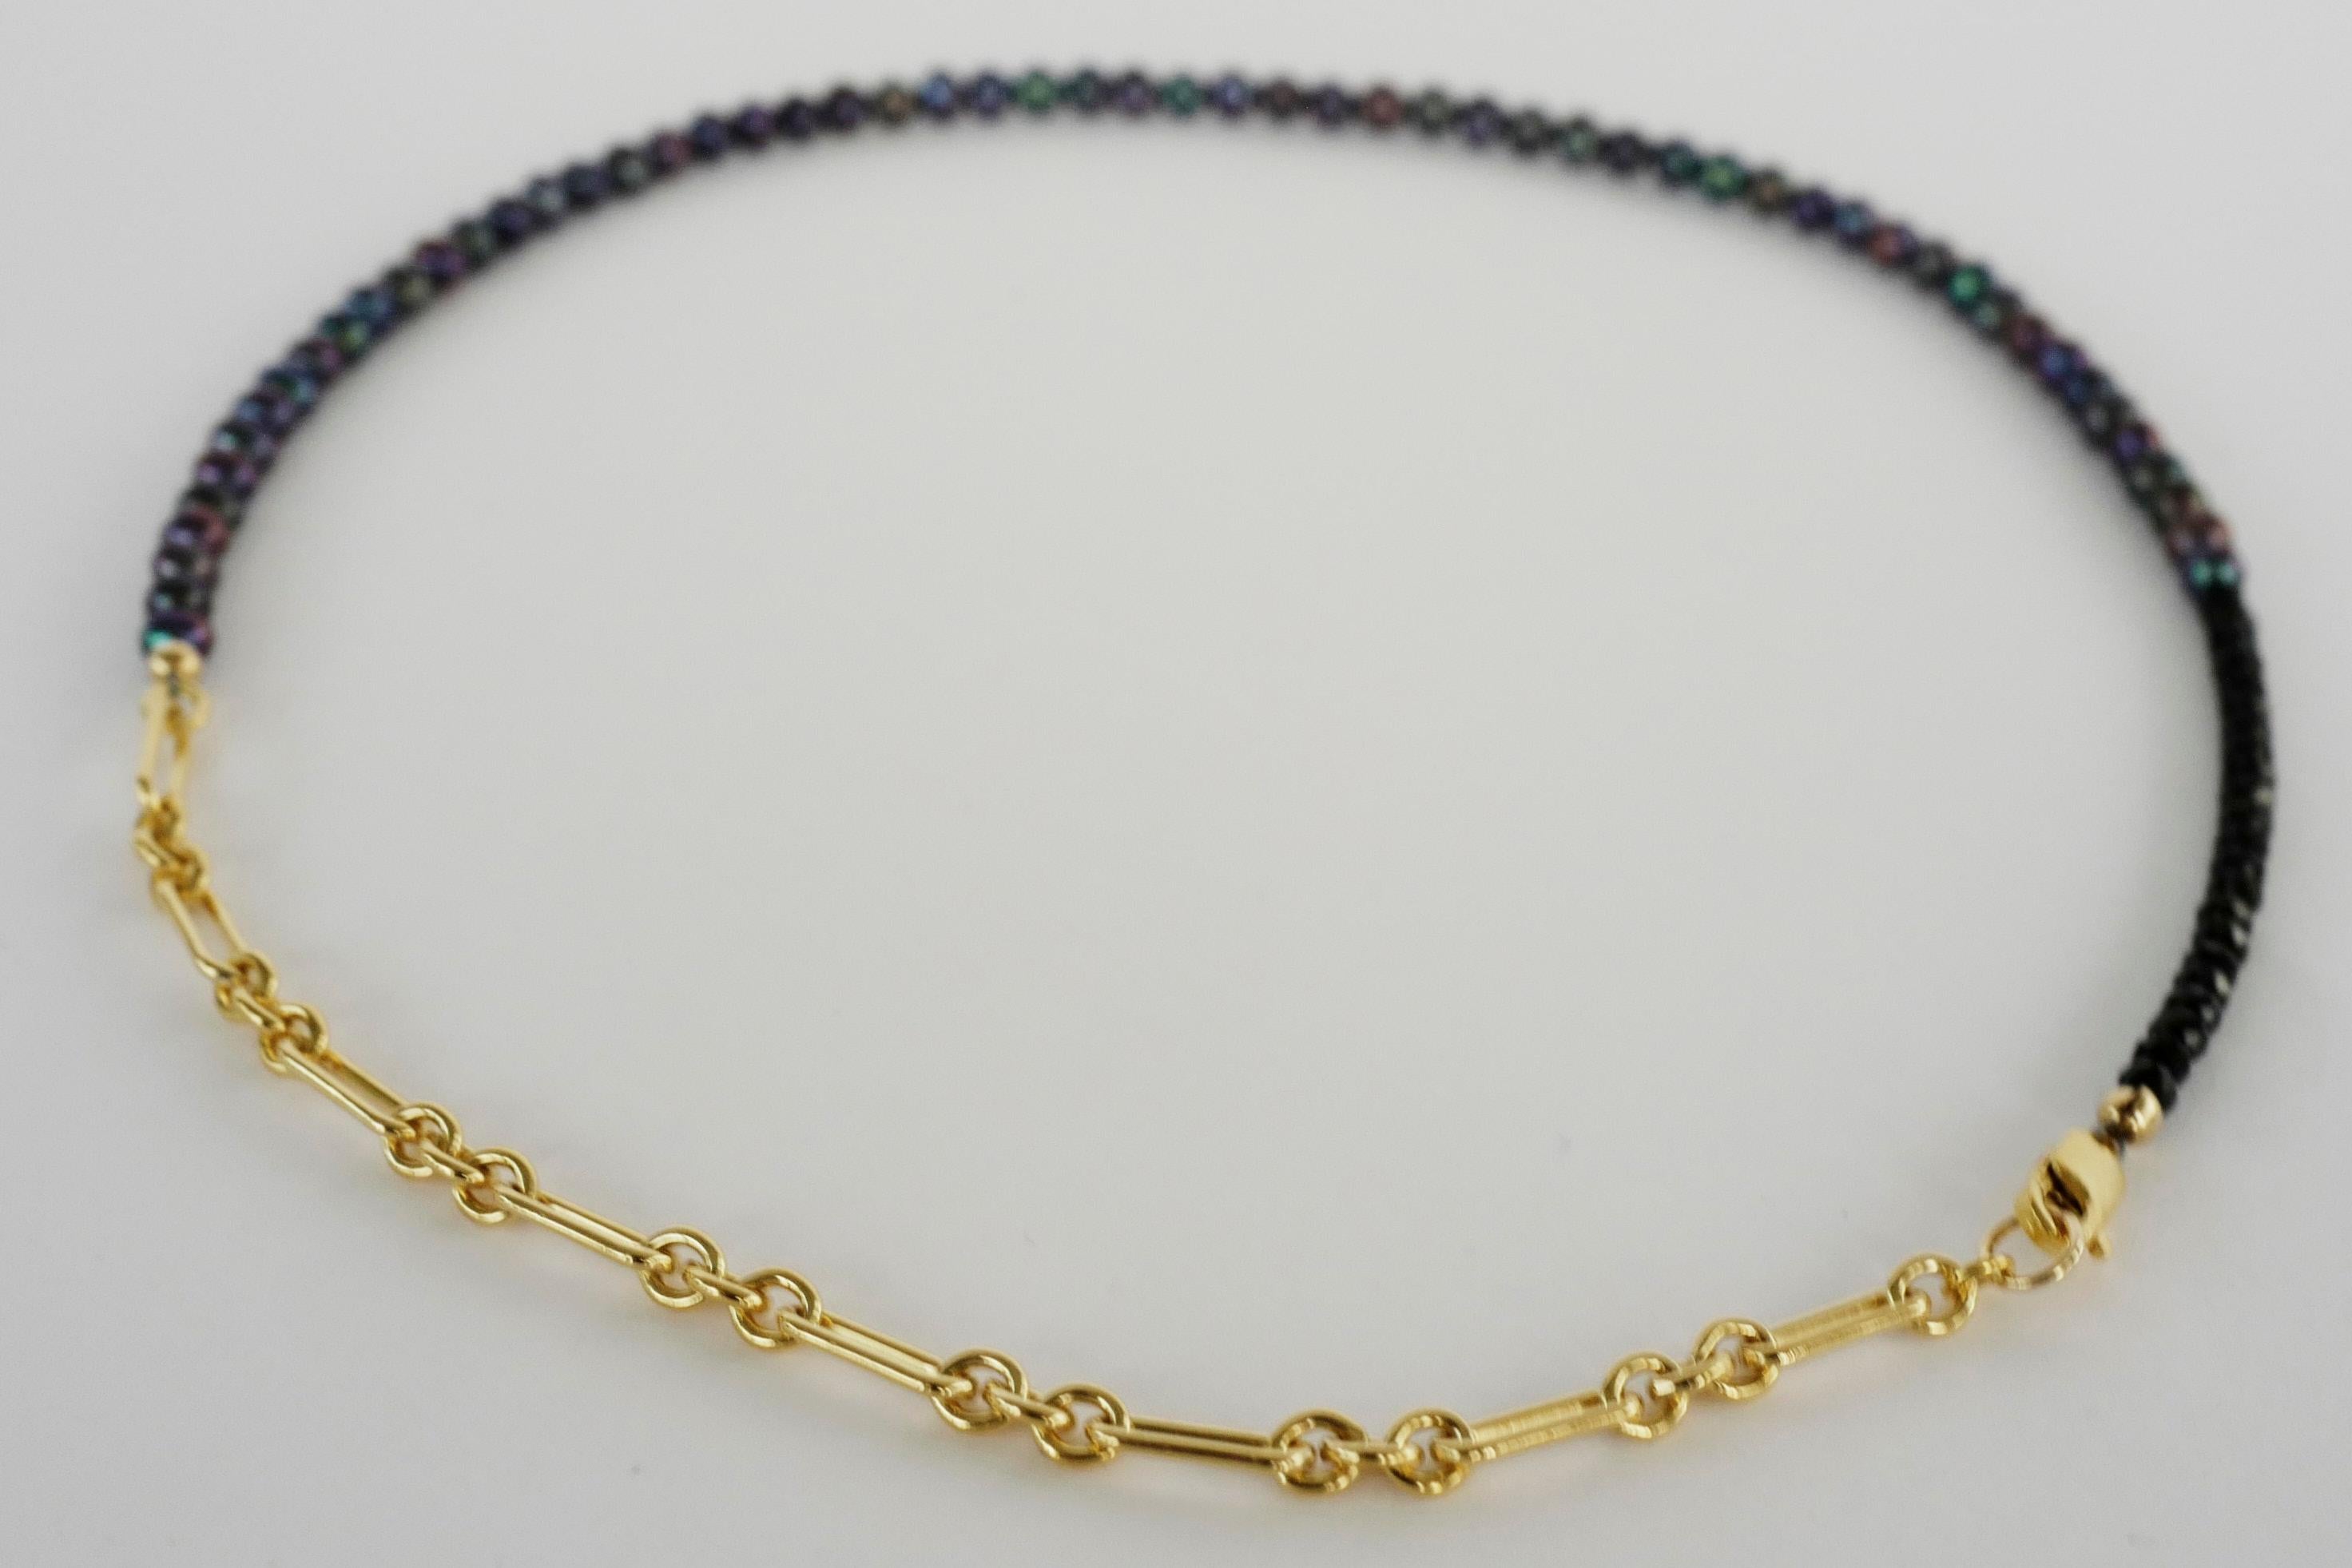 Round Cut Black Pearl Beaded Choker Necklace Black Spinel Gold Filled Chain J Dauphin For Sale